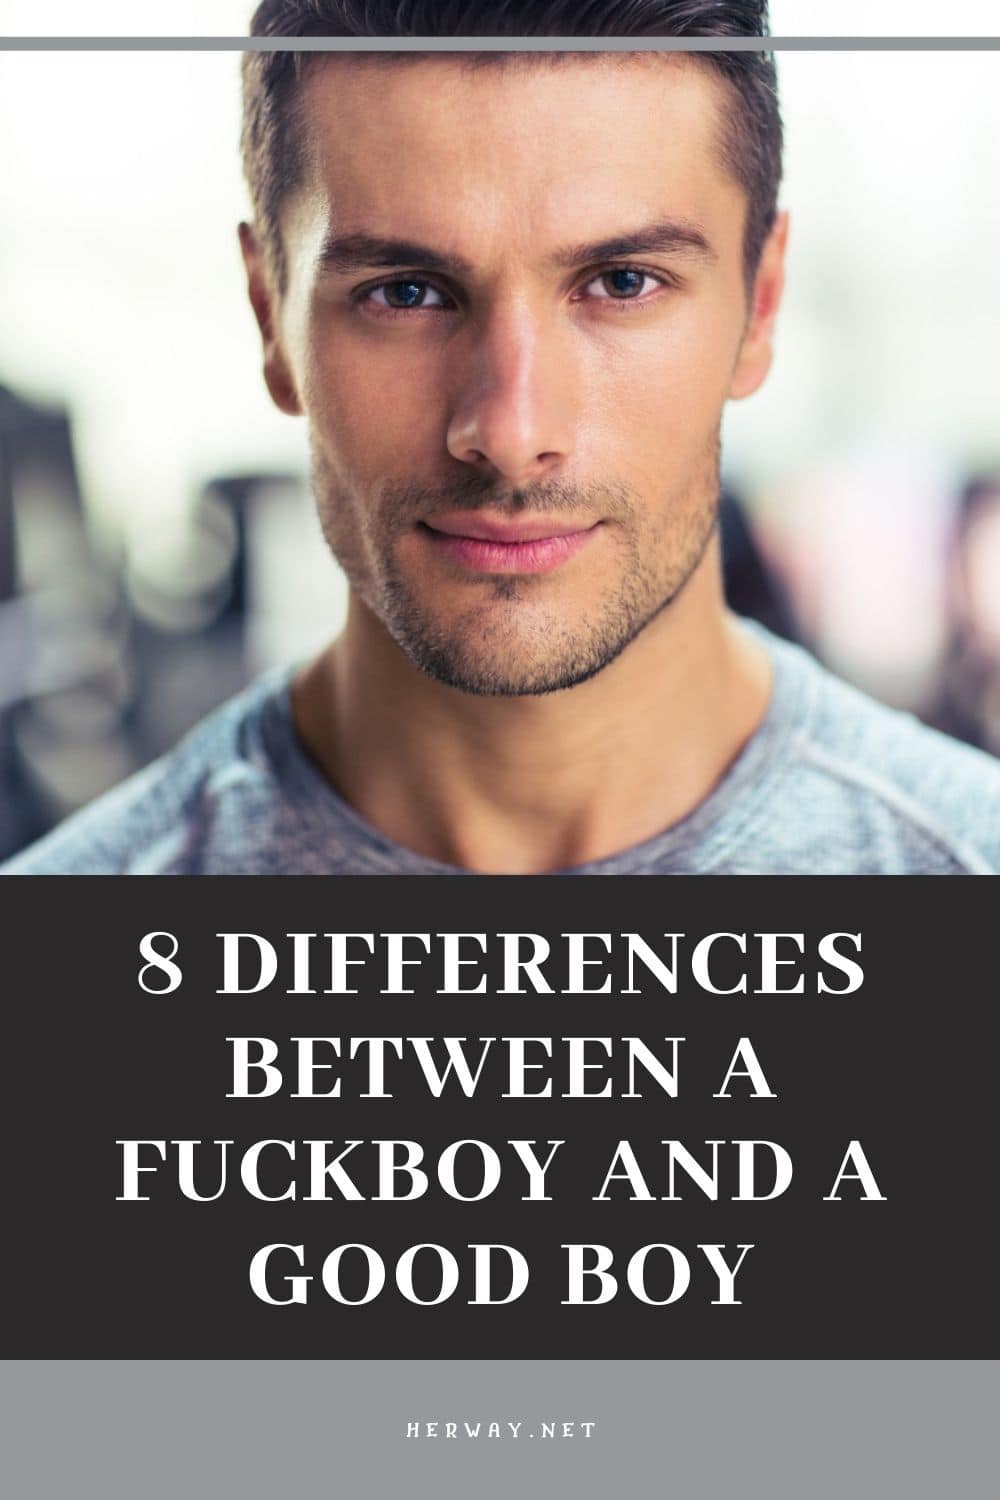 8 Differences Between A Fuckboy And A Good Boy